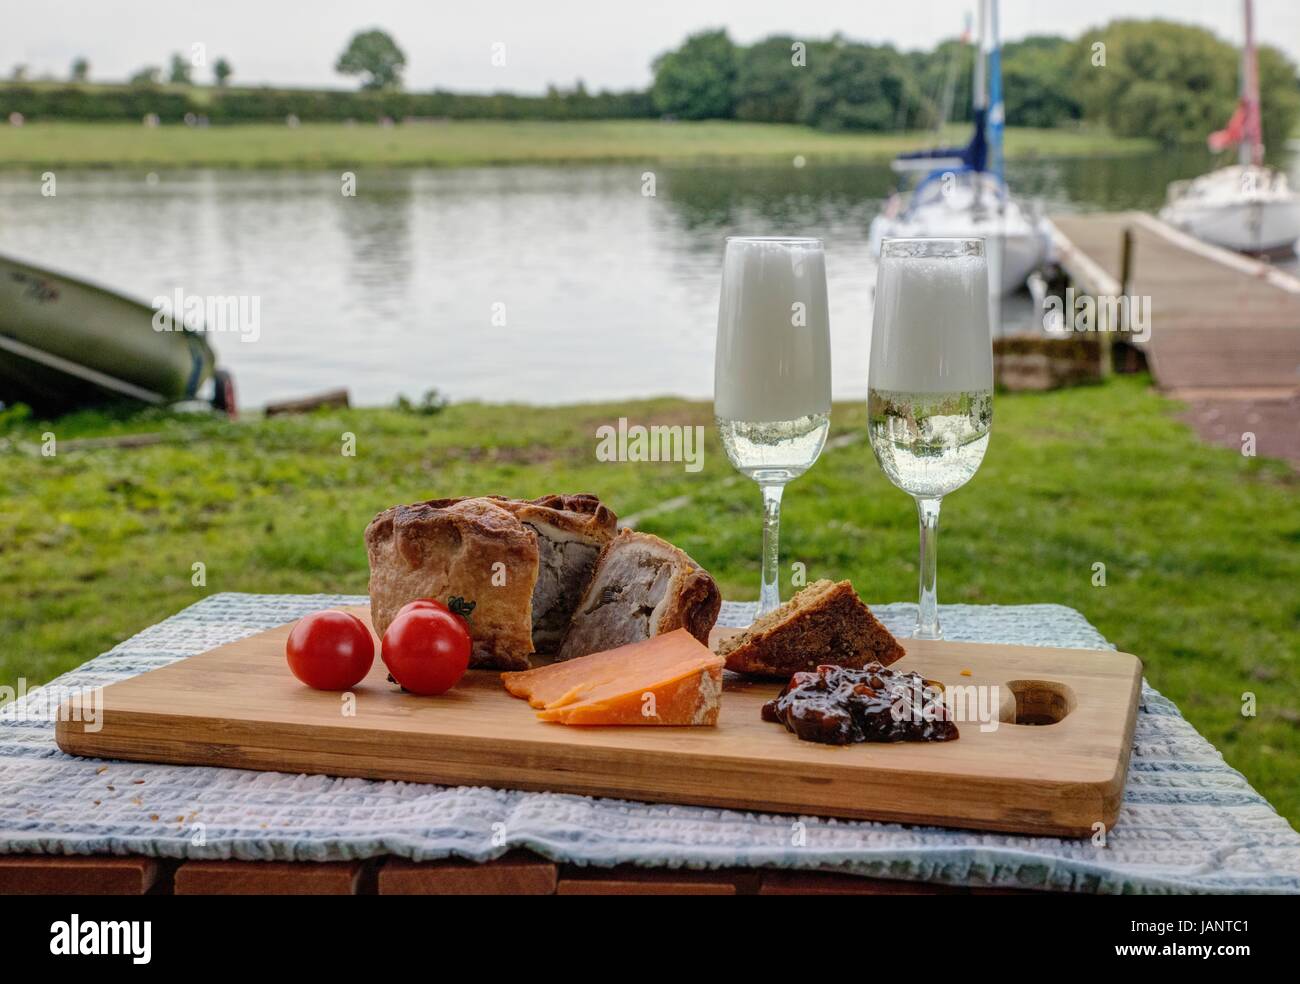 Pork pie with cheese and wine on a picnic platter Stock Photo